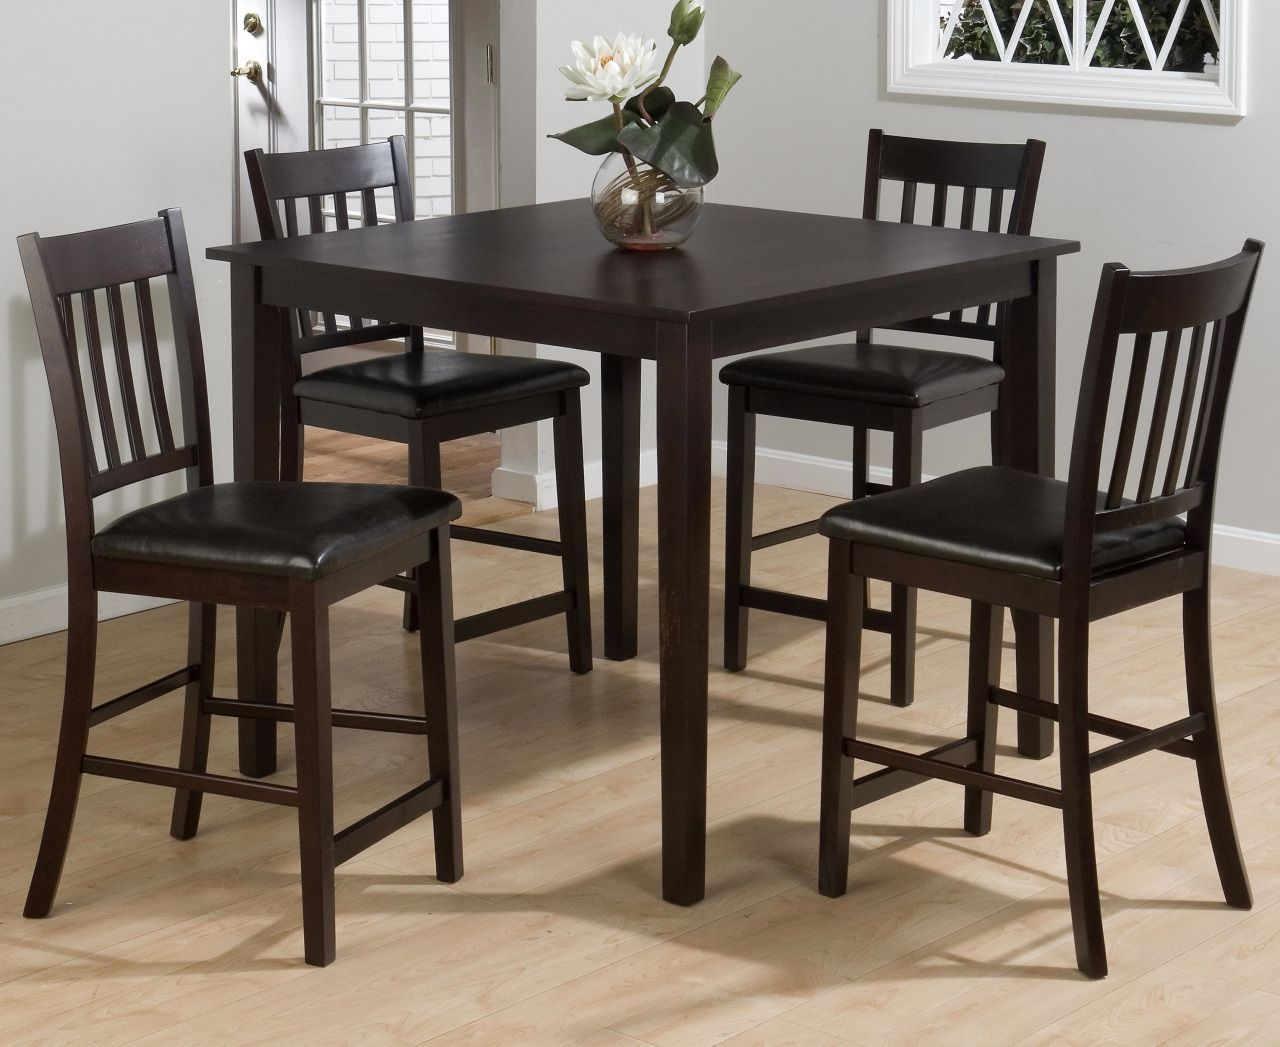 Big Lots Clearance Dining Room Sets